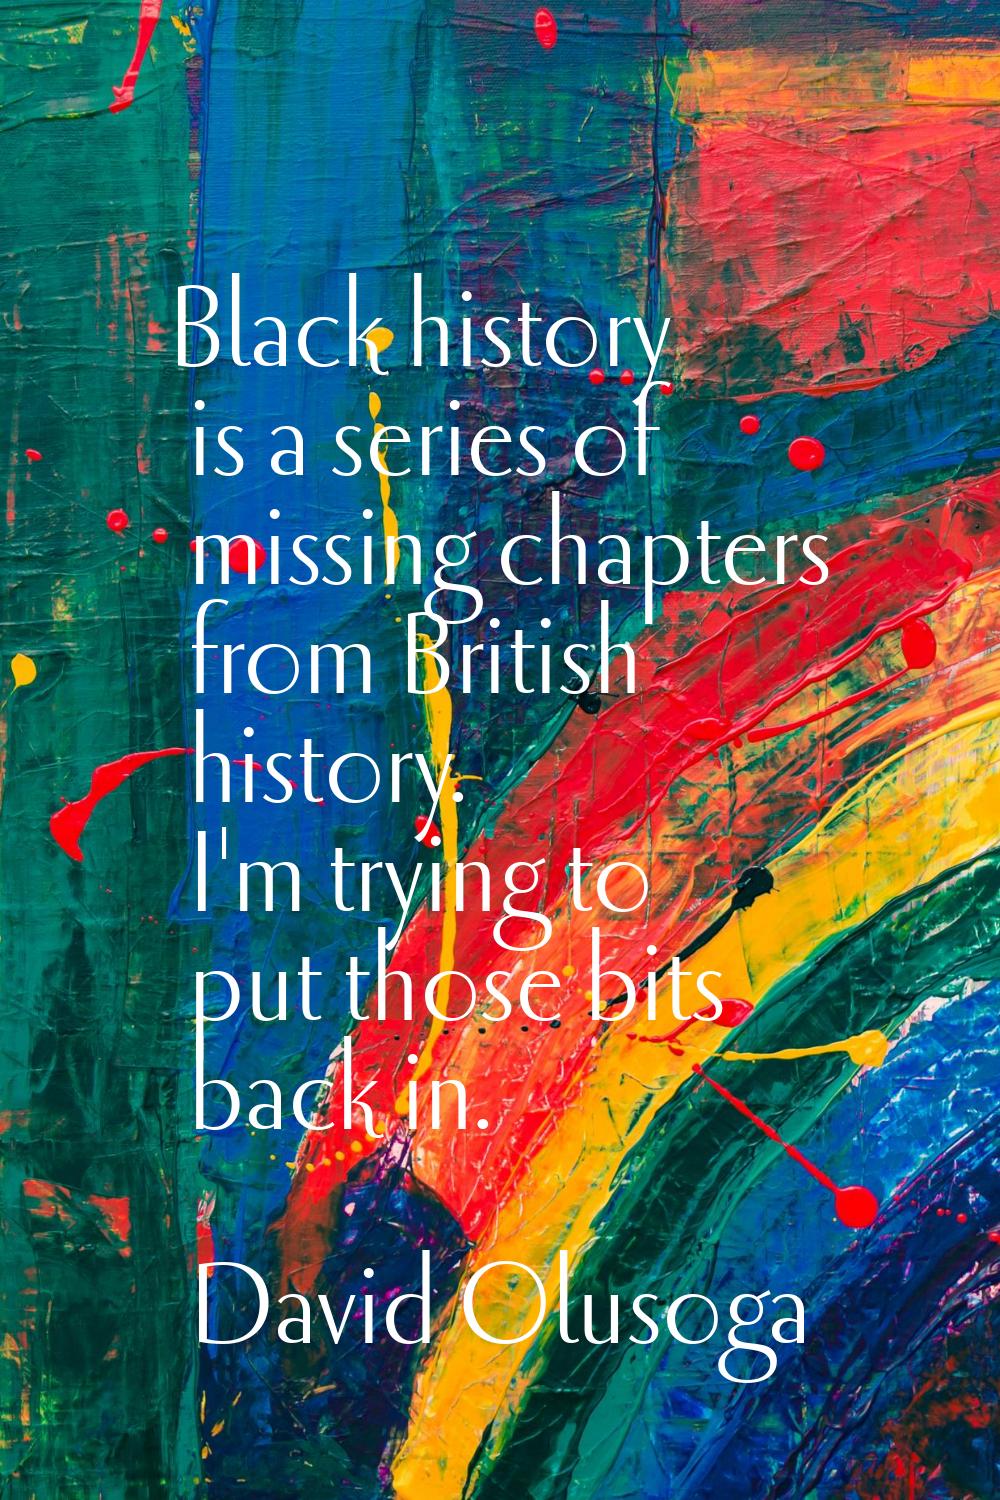 Black history is a series of missing chapters from British history. I'm trying to put those bits ba